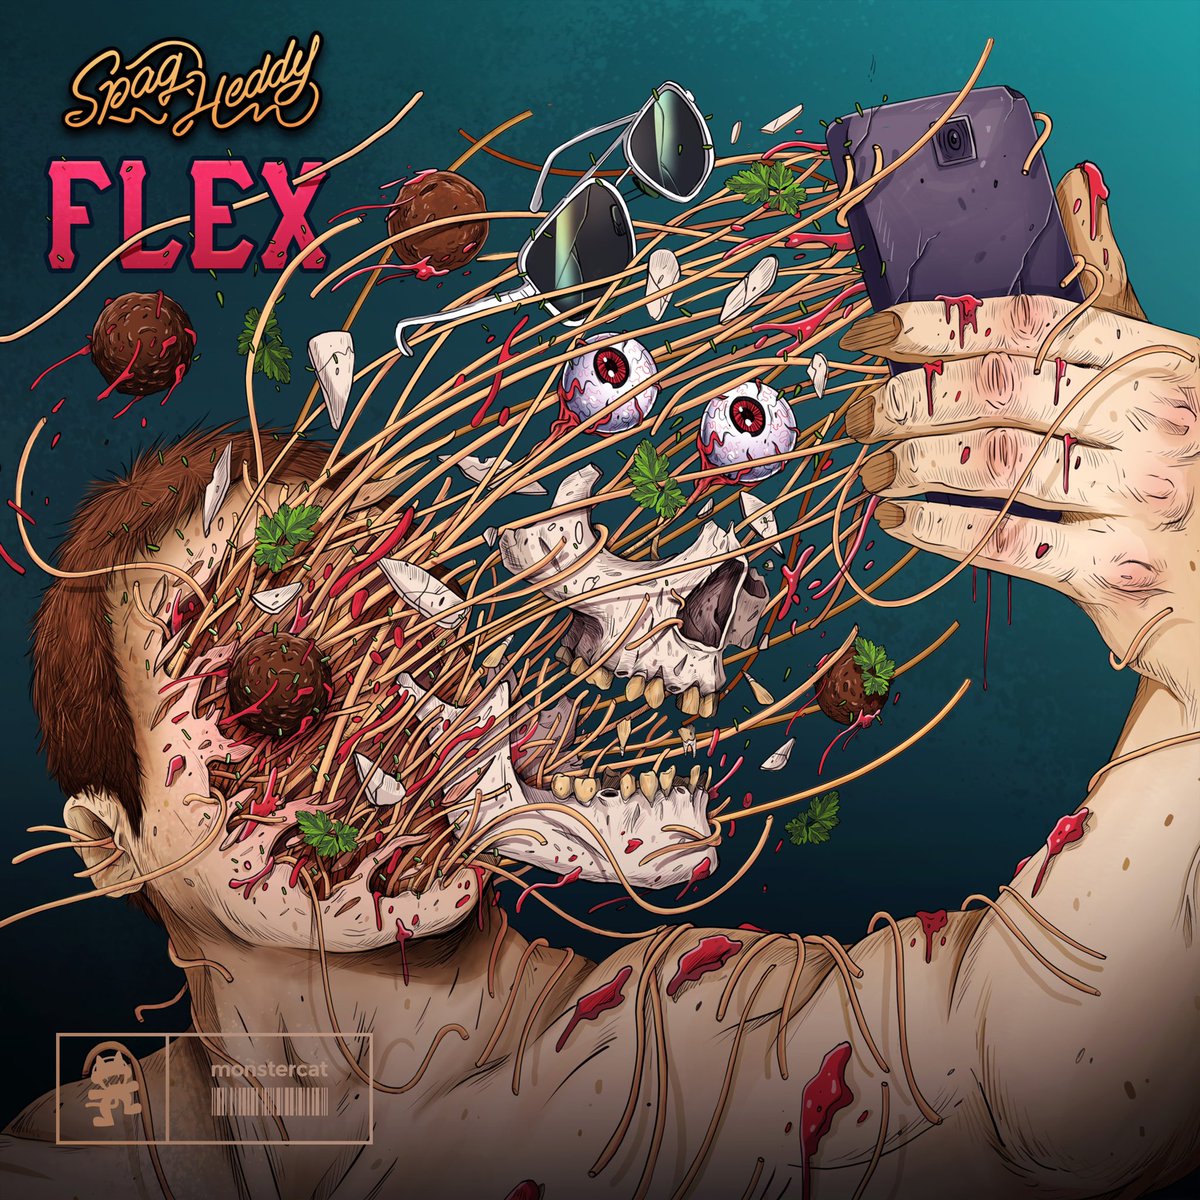 Time for a #ThrowbackThurday !! Exactly 1 month ago I dropped my song FLEX on @Monstercat did u listen to it yet?! 🙂‍↔️ Flex to your friends and family right here: listen.monstercatmusic.com/flex-x75j